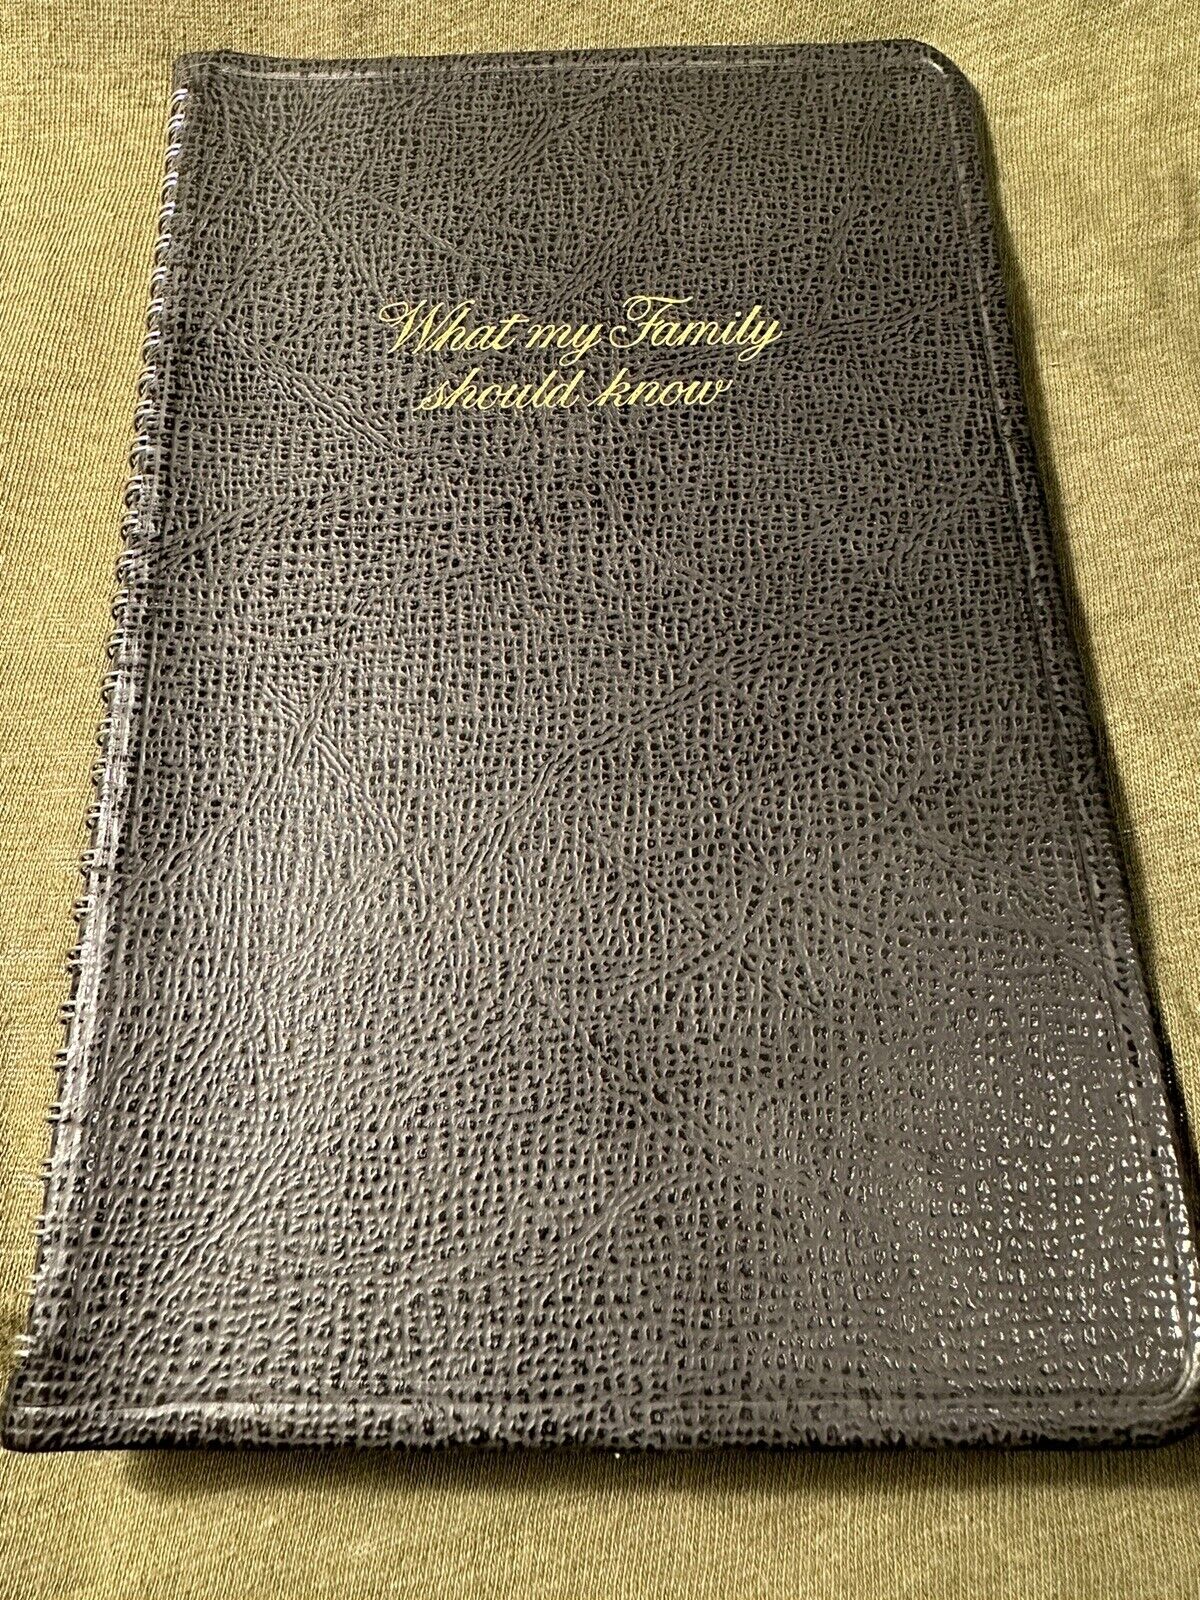 Vintage 1973 - What My Family Should Know - Estate Planning Spiral Bound, clean